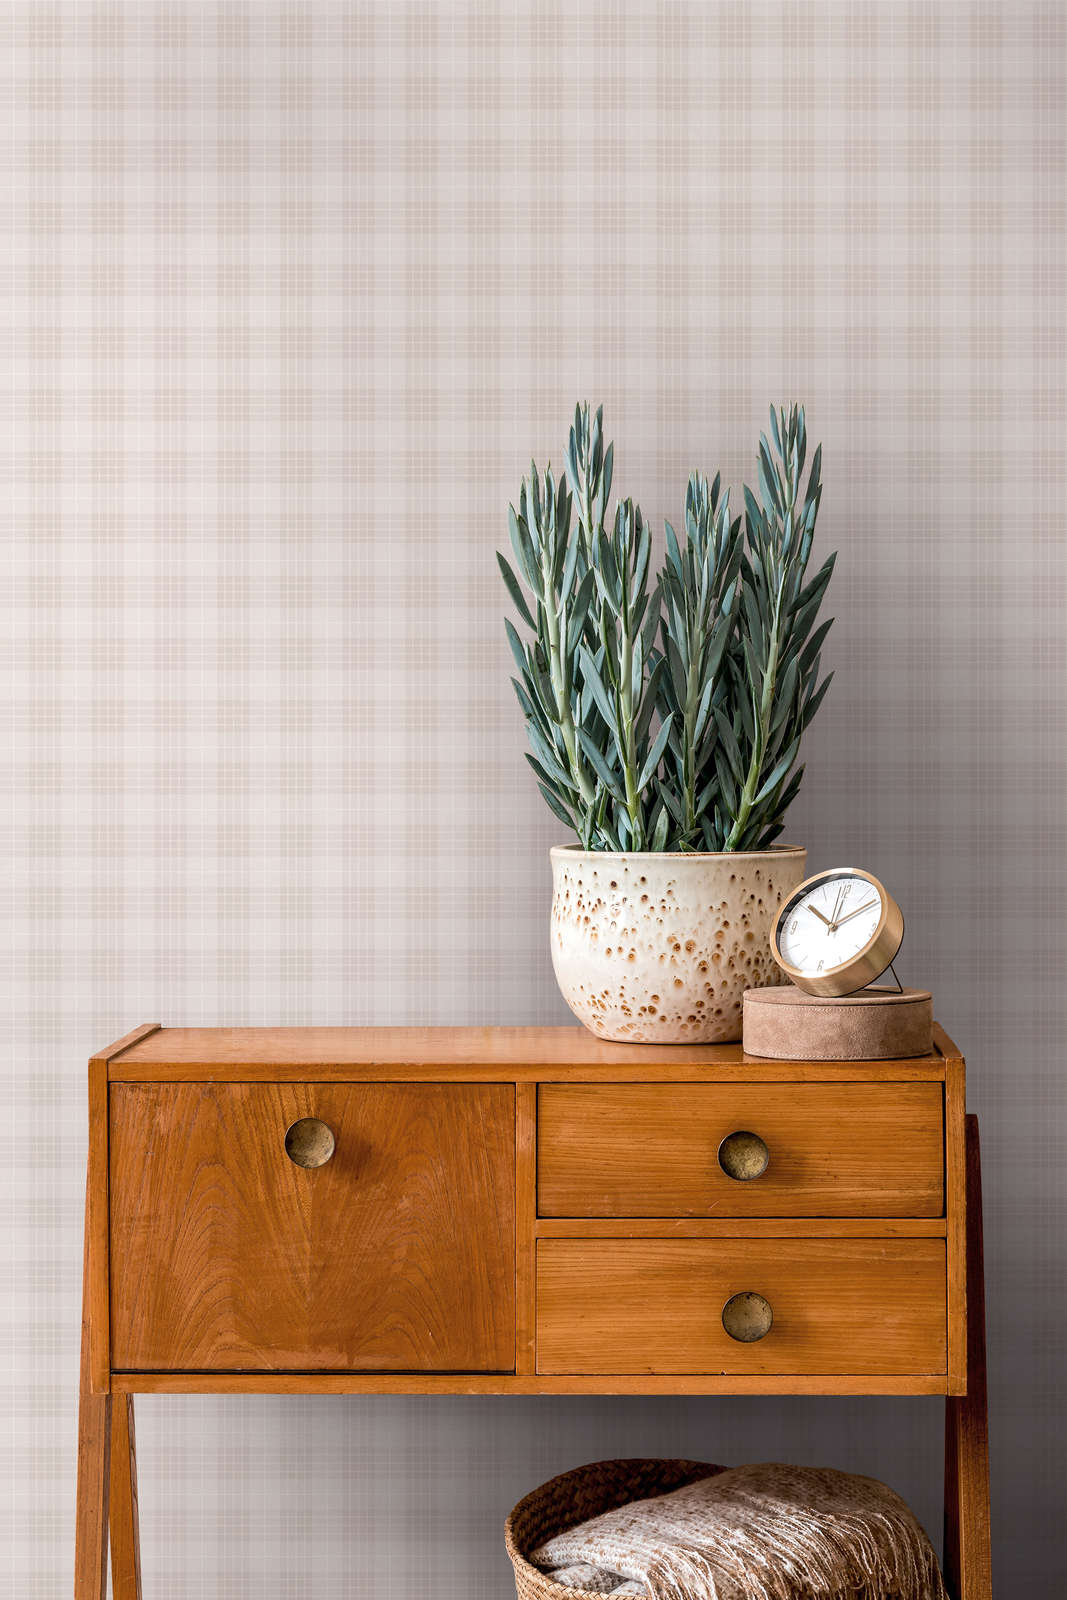             Non-woven wallpaper chequered with flannel fabric look - cream, white
        